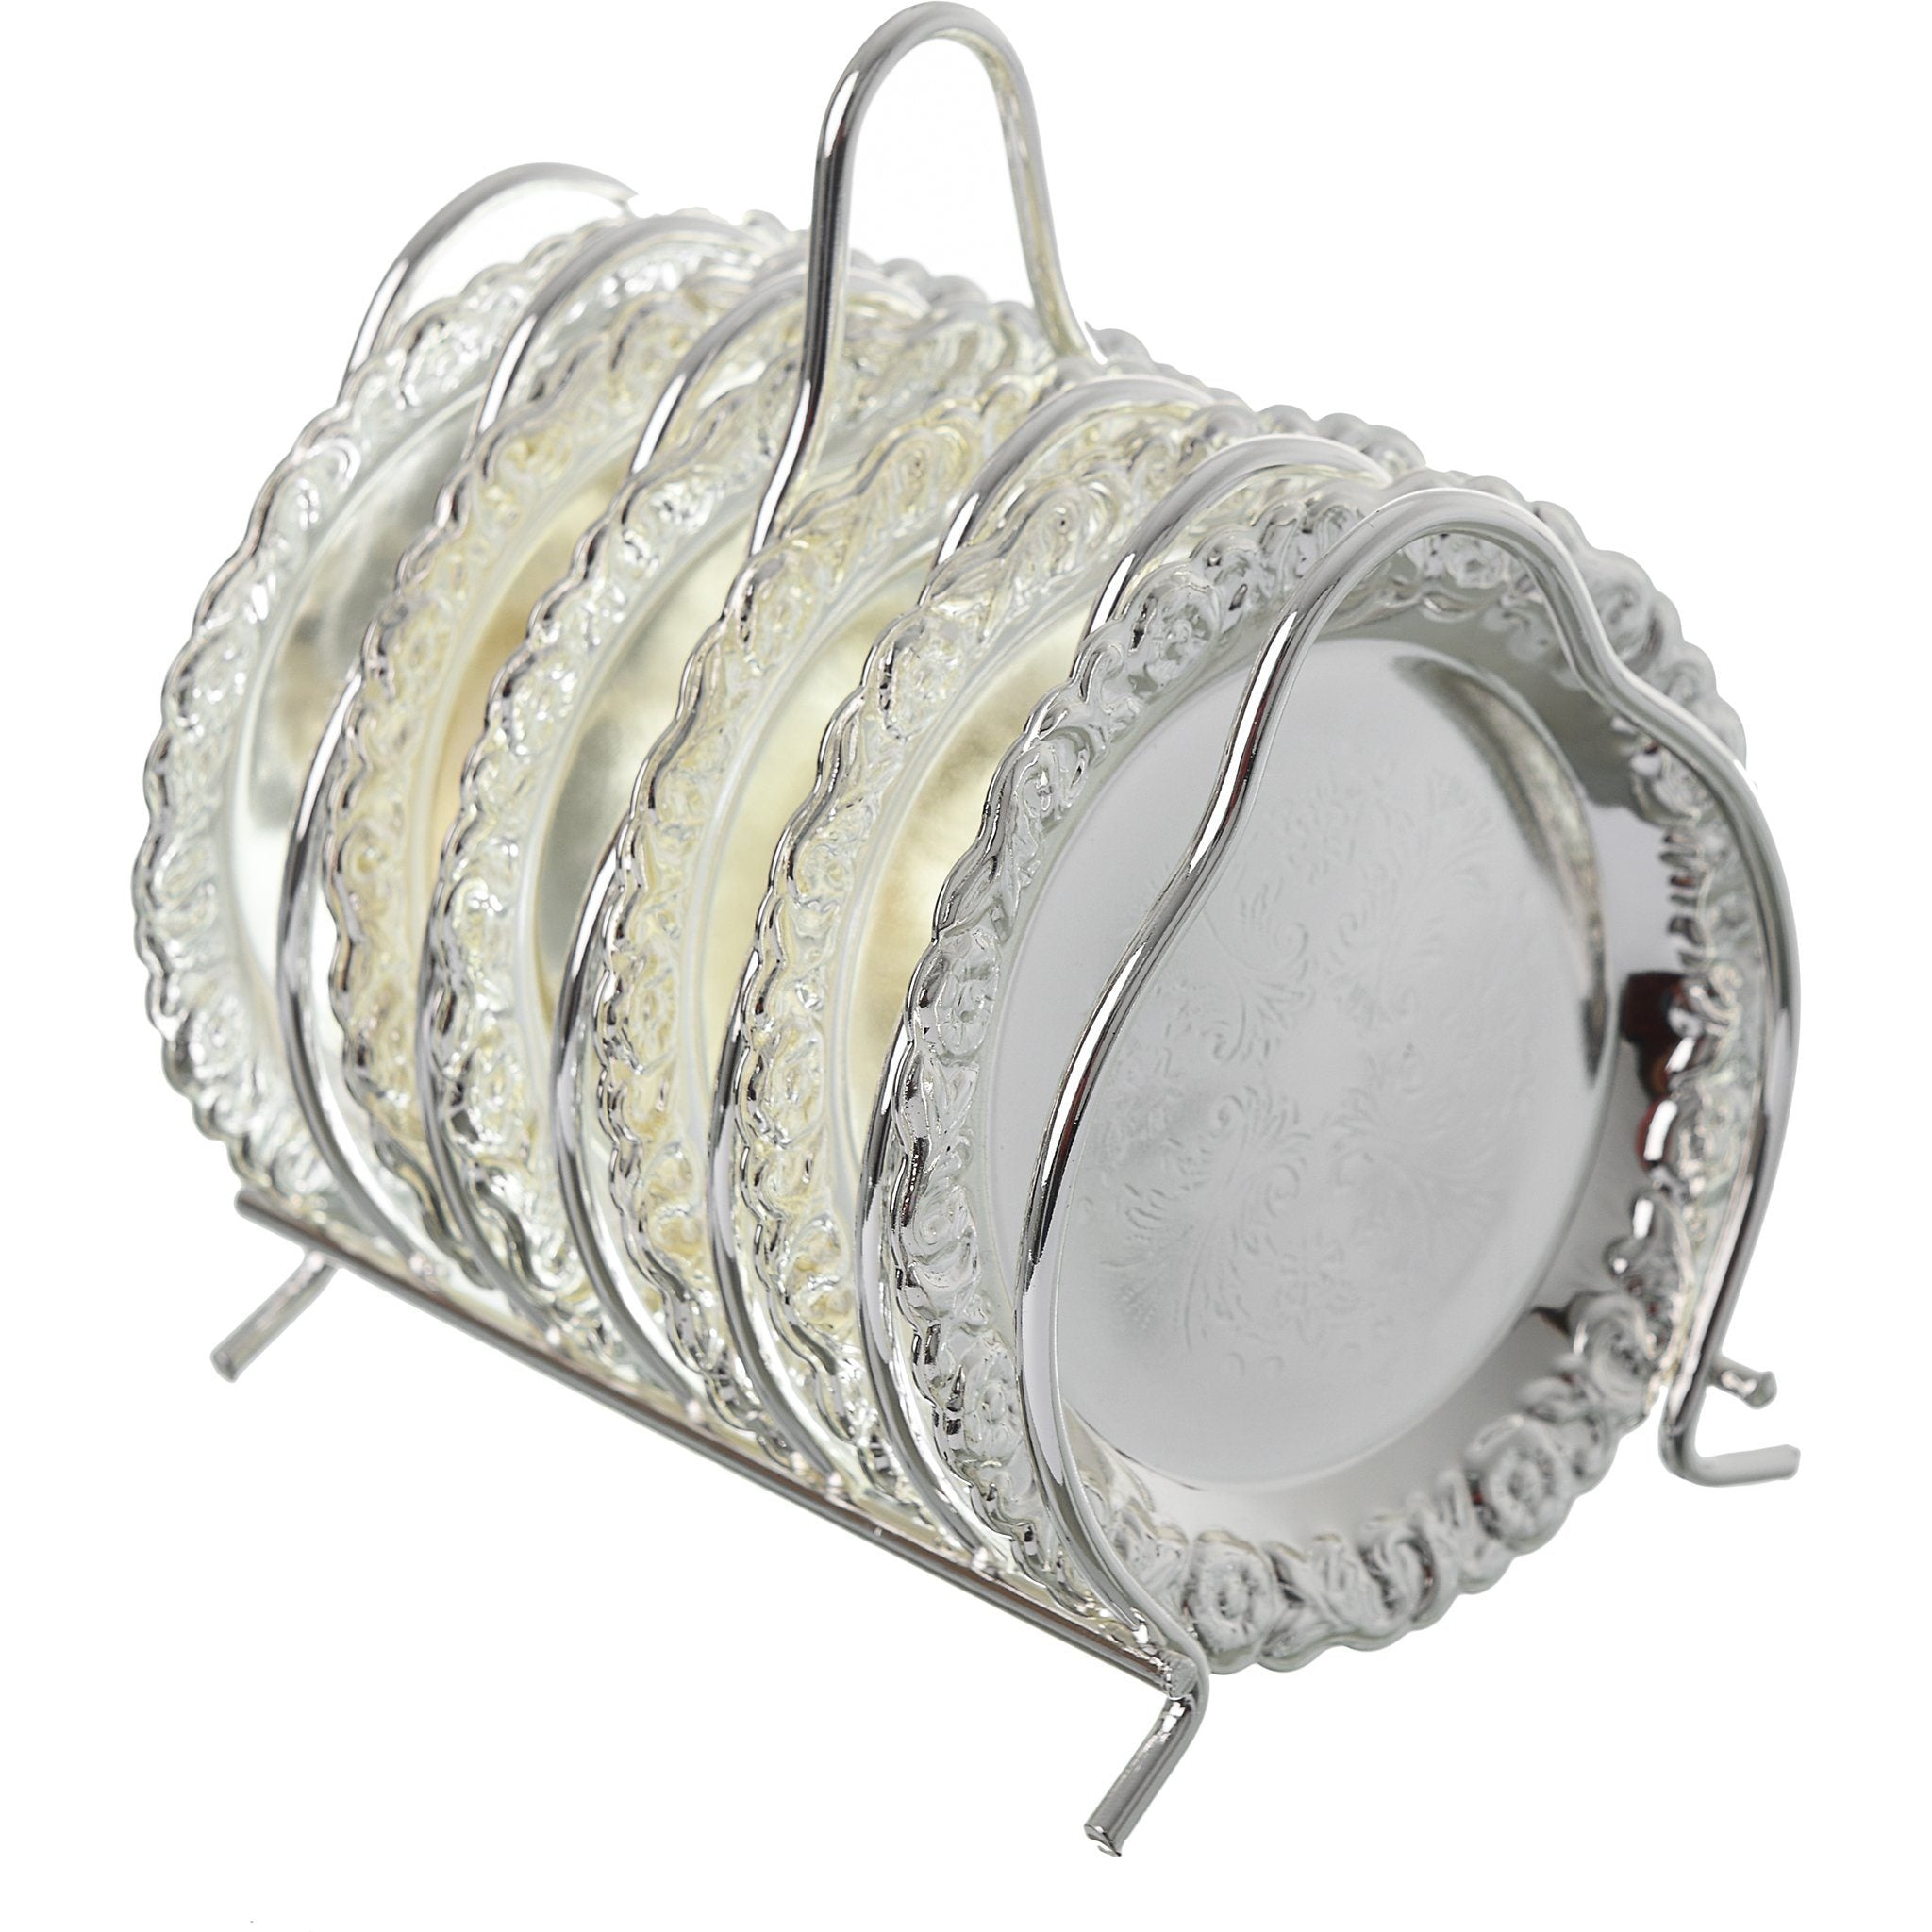 Queen Anne - Round Floral Edged Coaster with Stand 6 Pieces - Silver Plated Metal - 9.4cm - 26000209